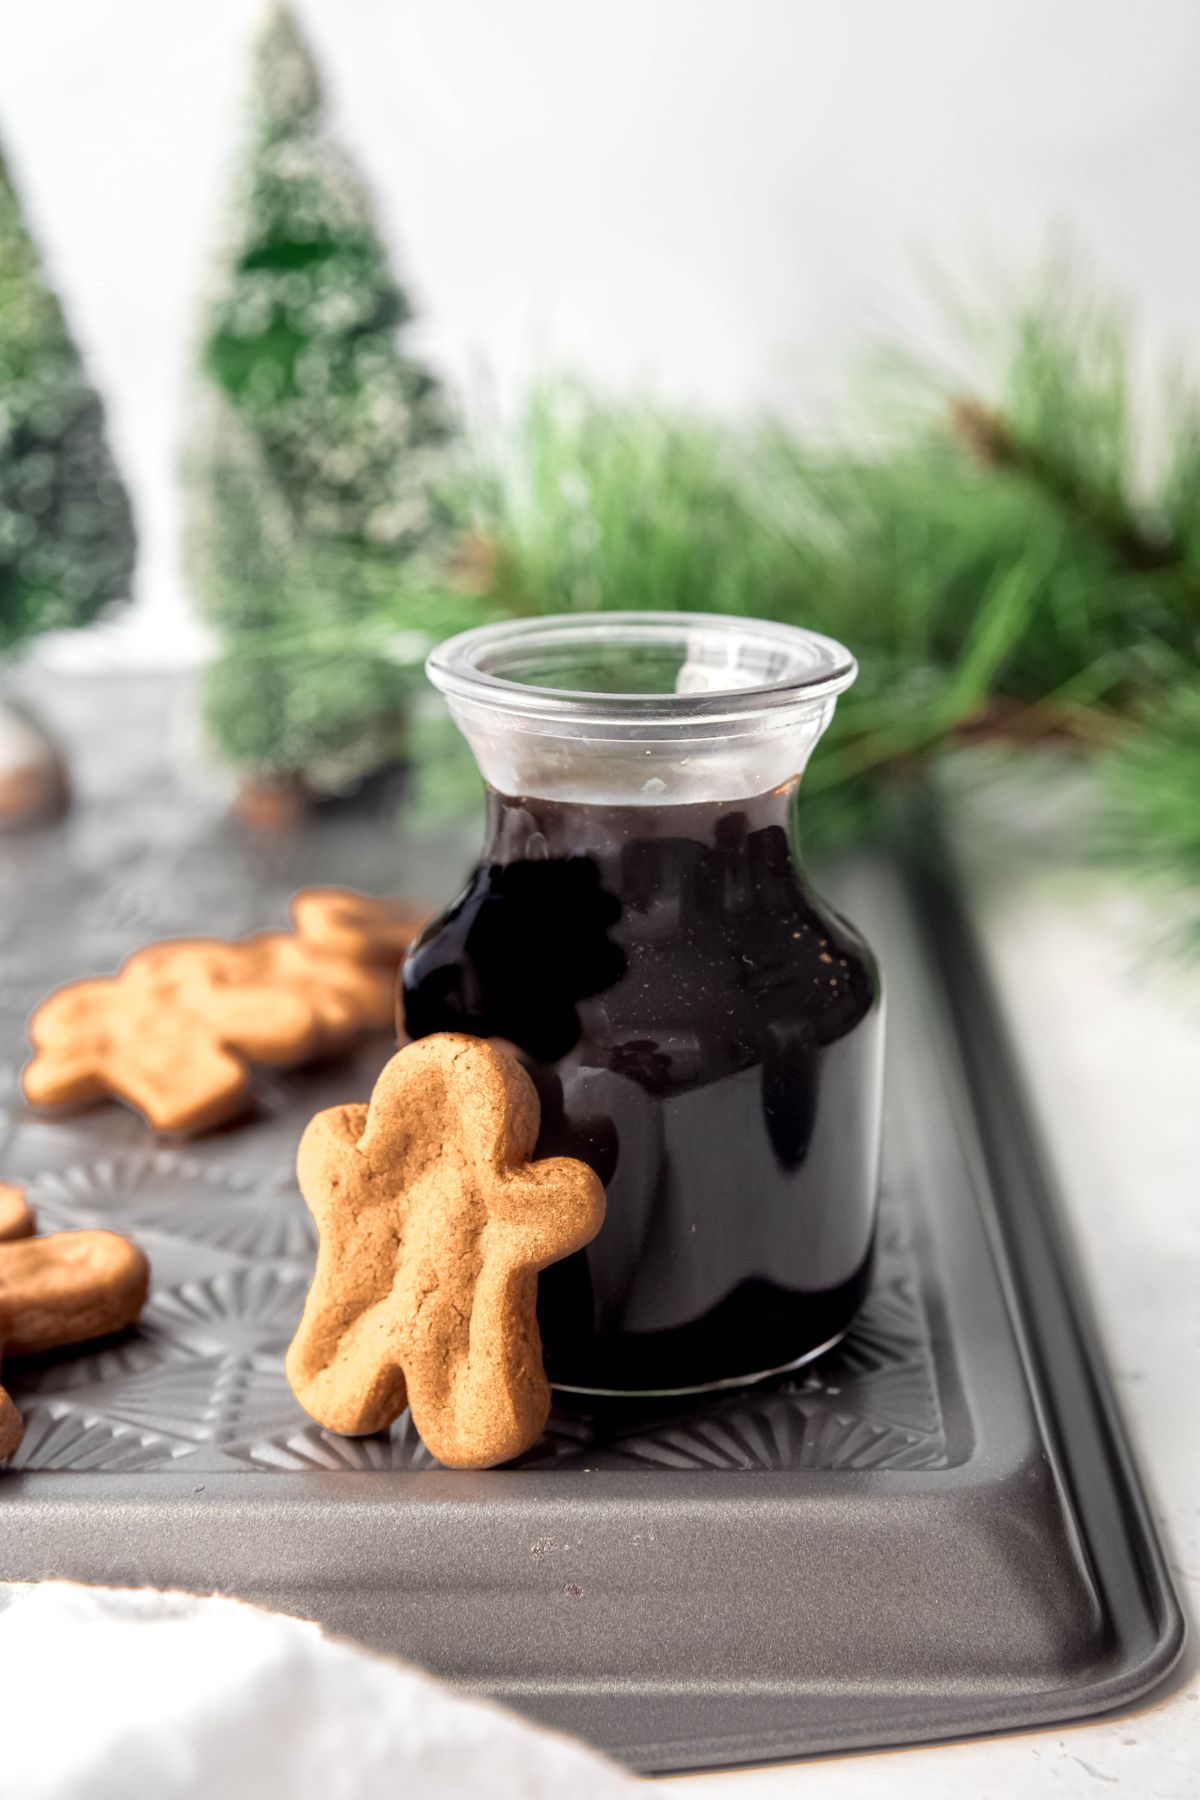 A small decanter of gingerbread syrup on a metal pan next to gingerbread man cookies.